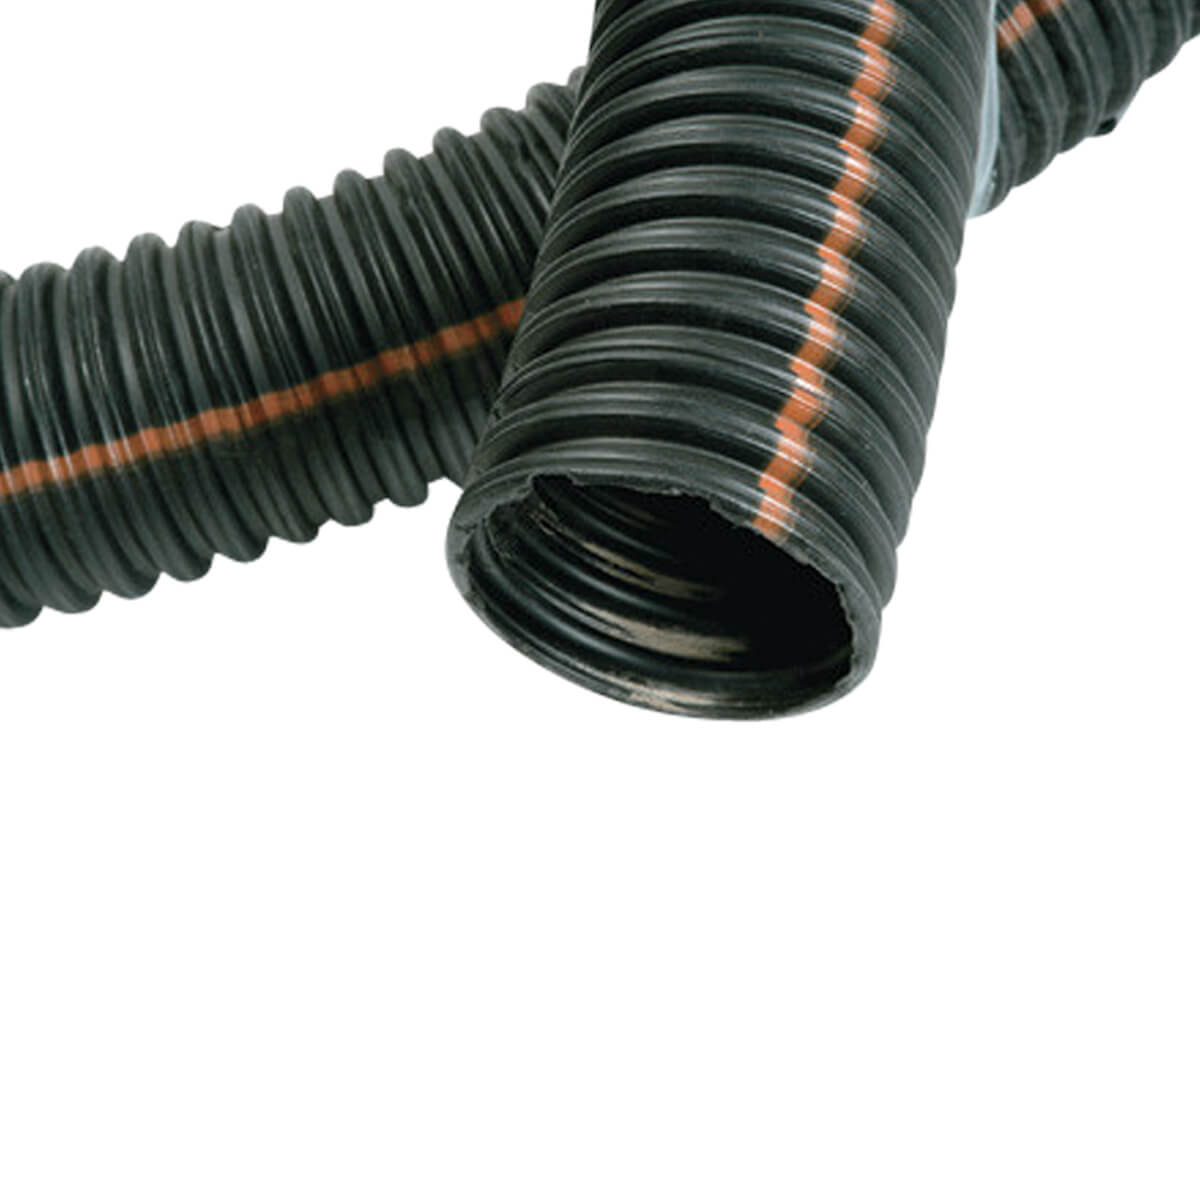 Drainage Pipe - 4-in - Perforated Per Ft